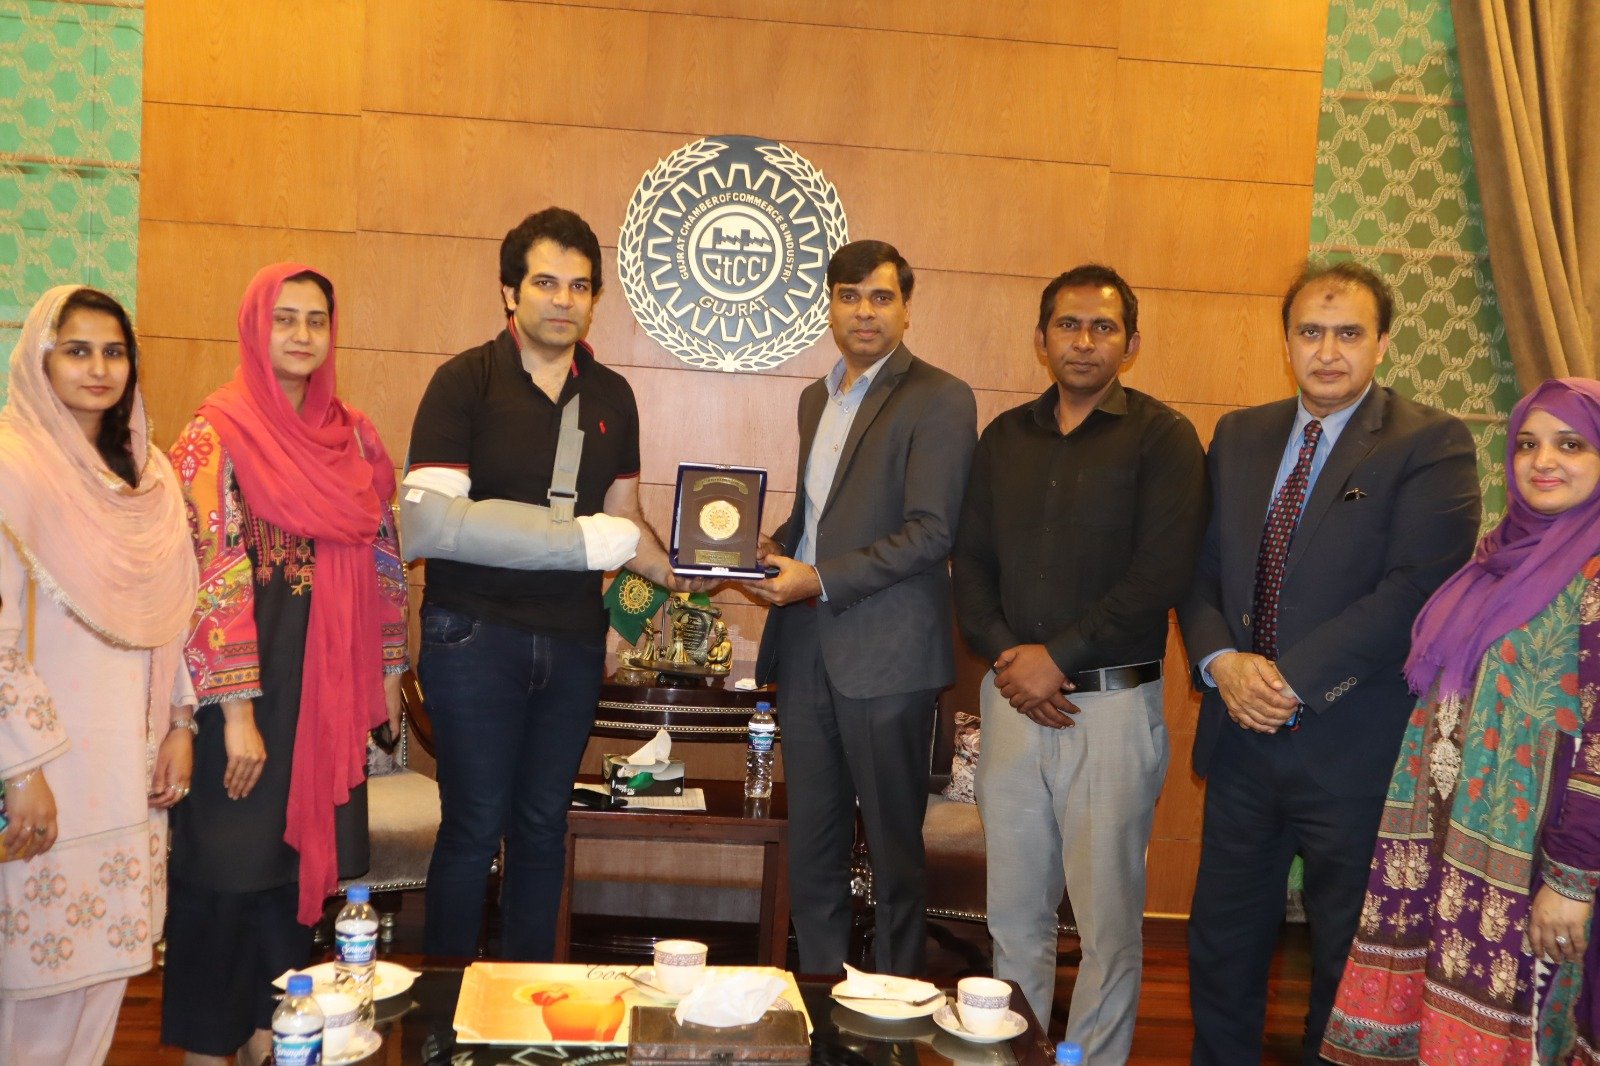 A #meeting #session was held at Gujrat Chamber of Commerce and Industry with #School of #Law University of Gujrat #UOG under the presidency of Mr. Sikander Ishfaq Razi #President #GtCCI.